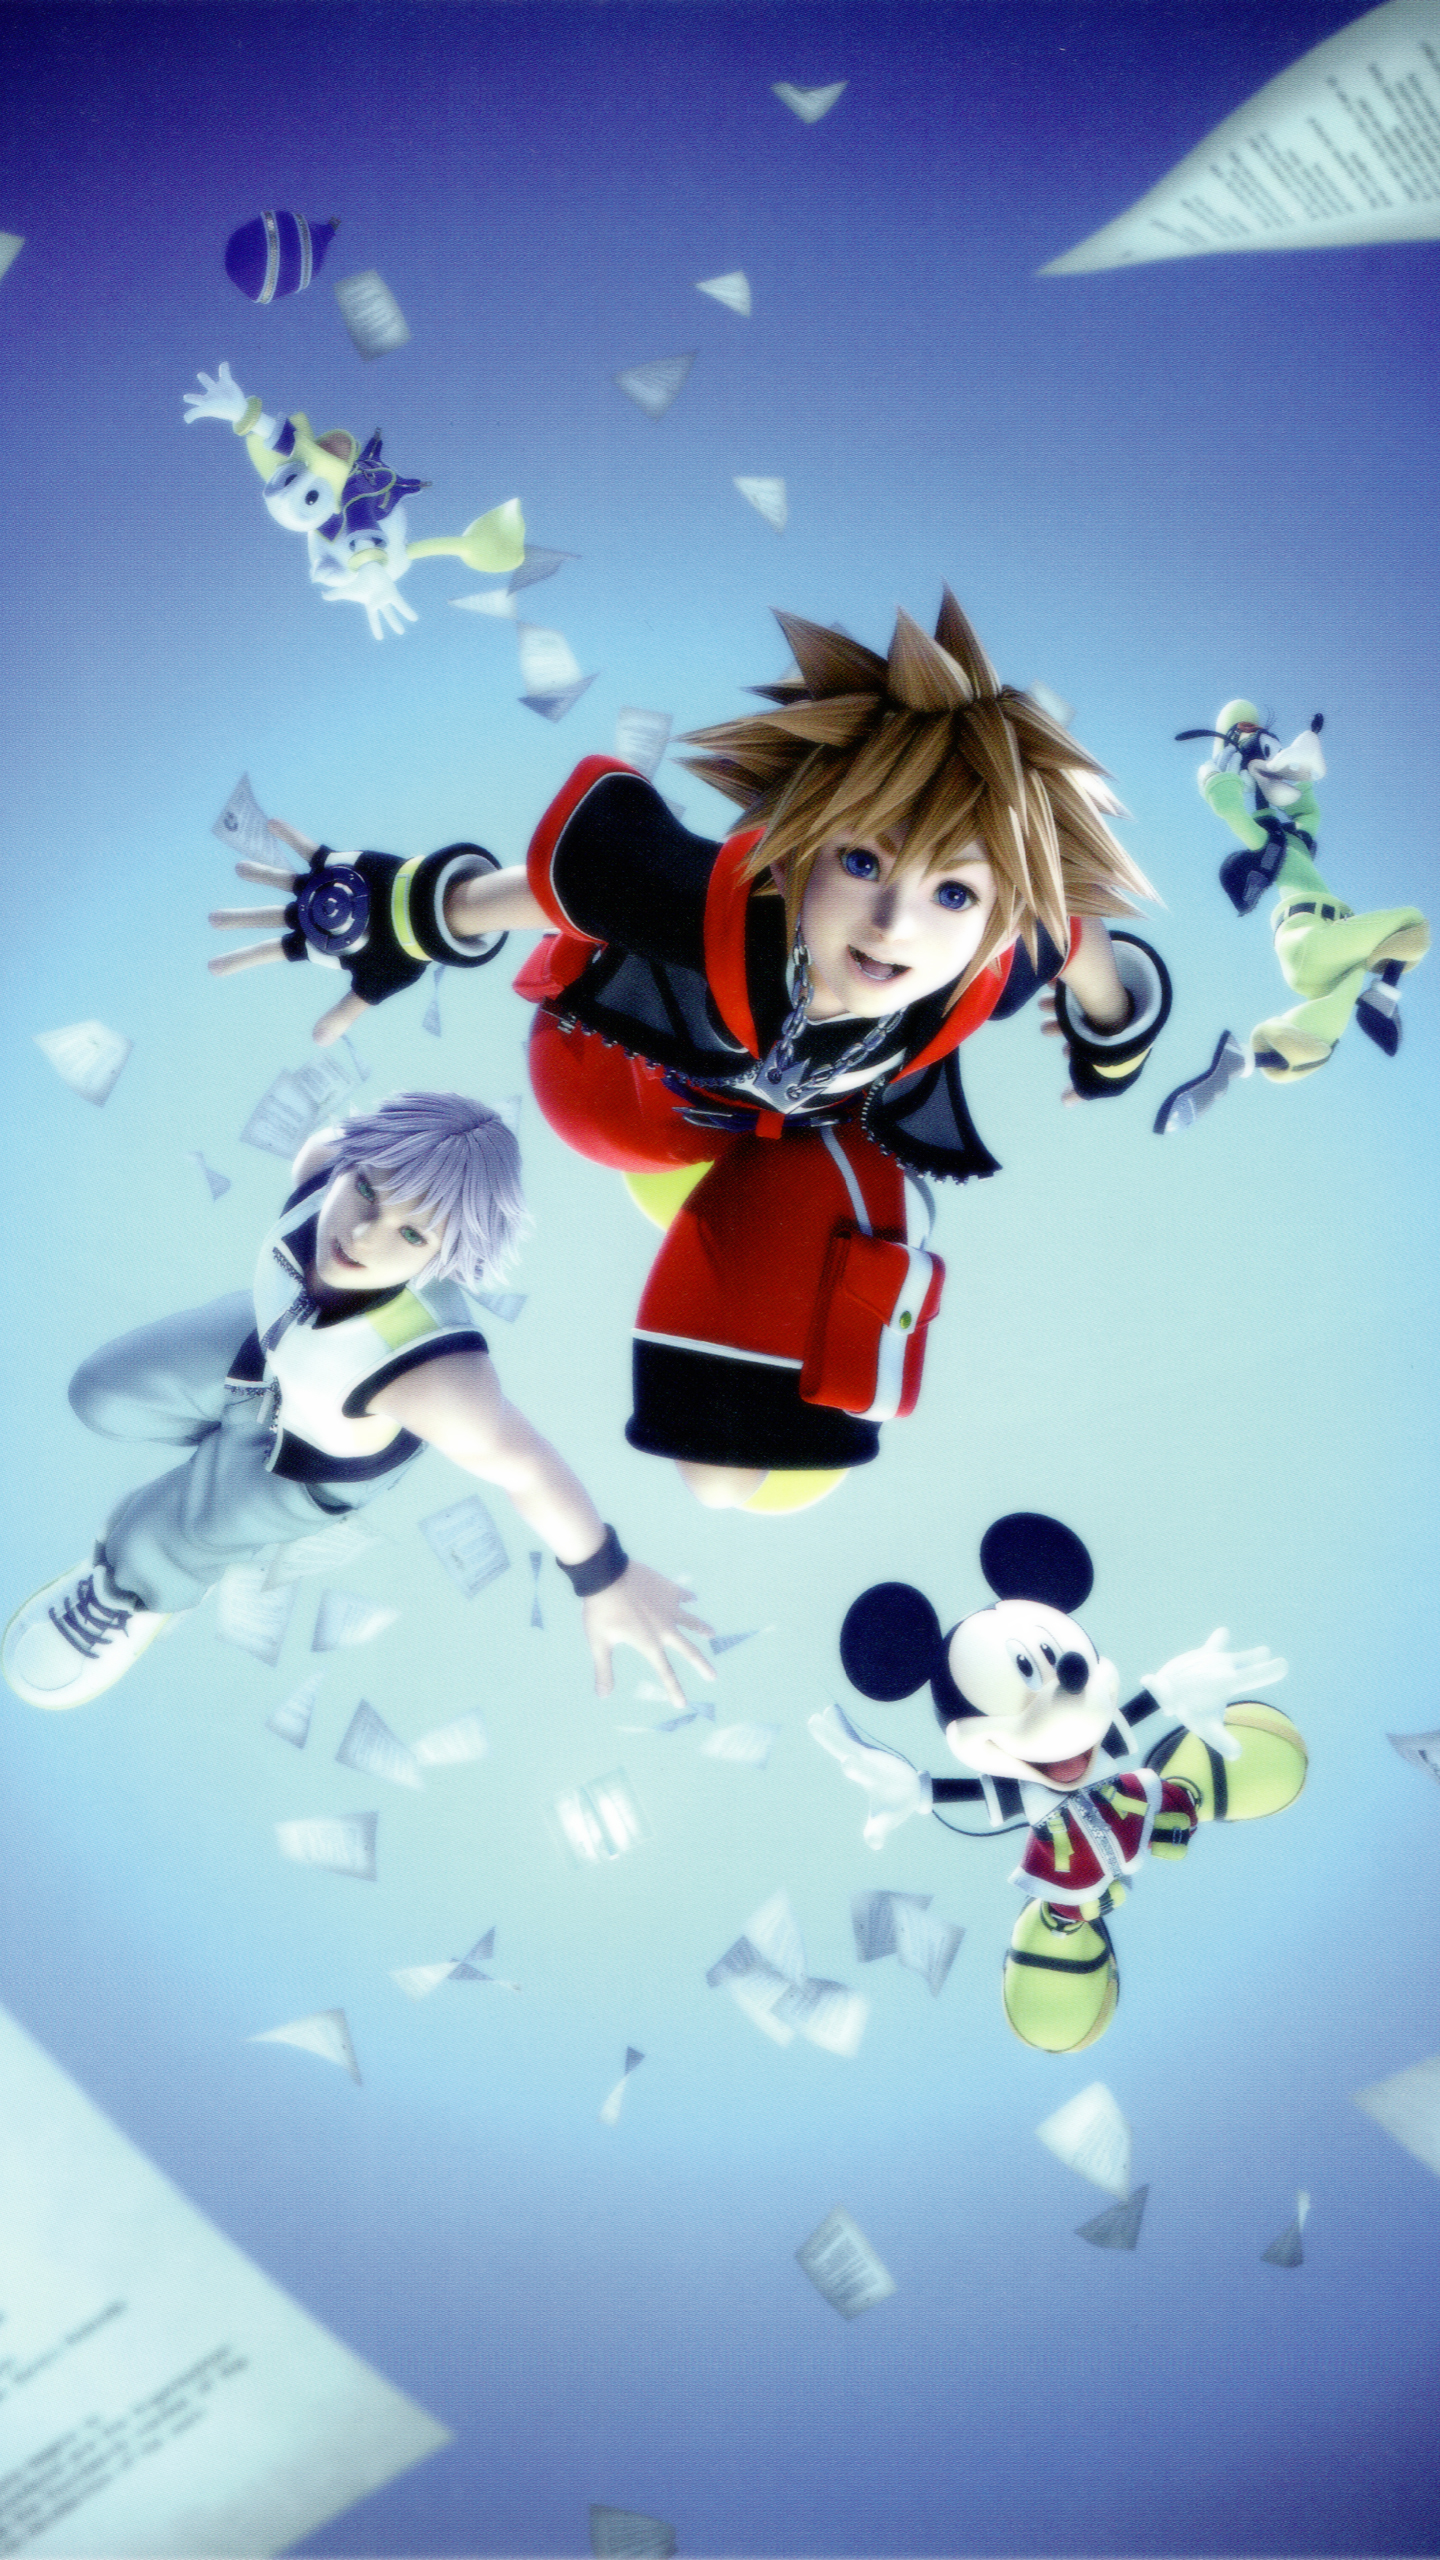 The Forgotten Lair | Kingdom Hearts Mobile Wallpapers
